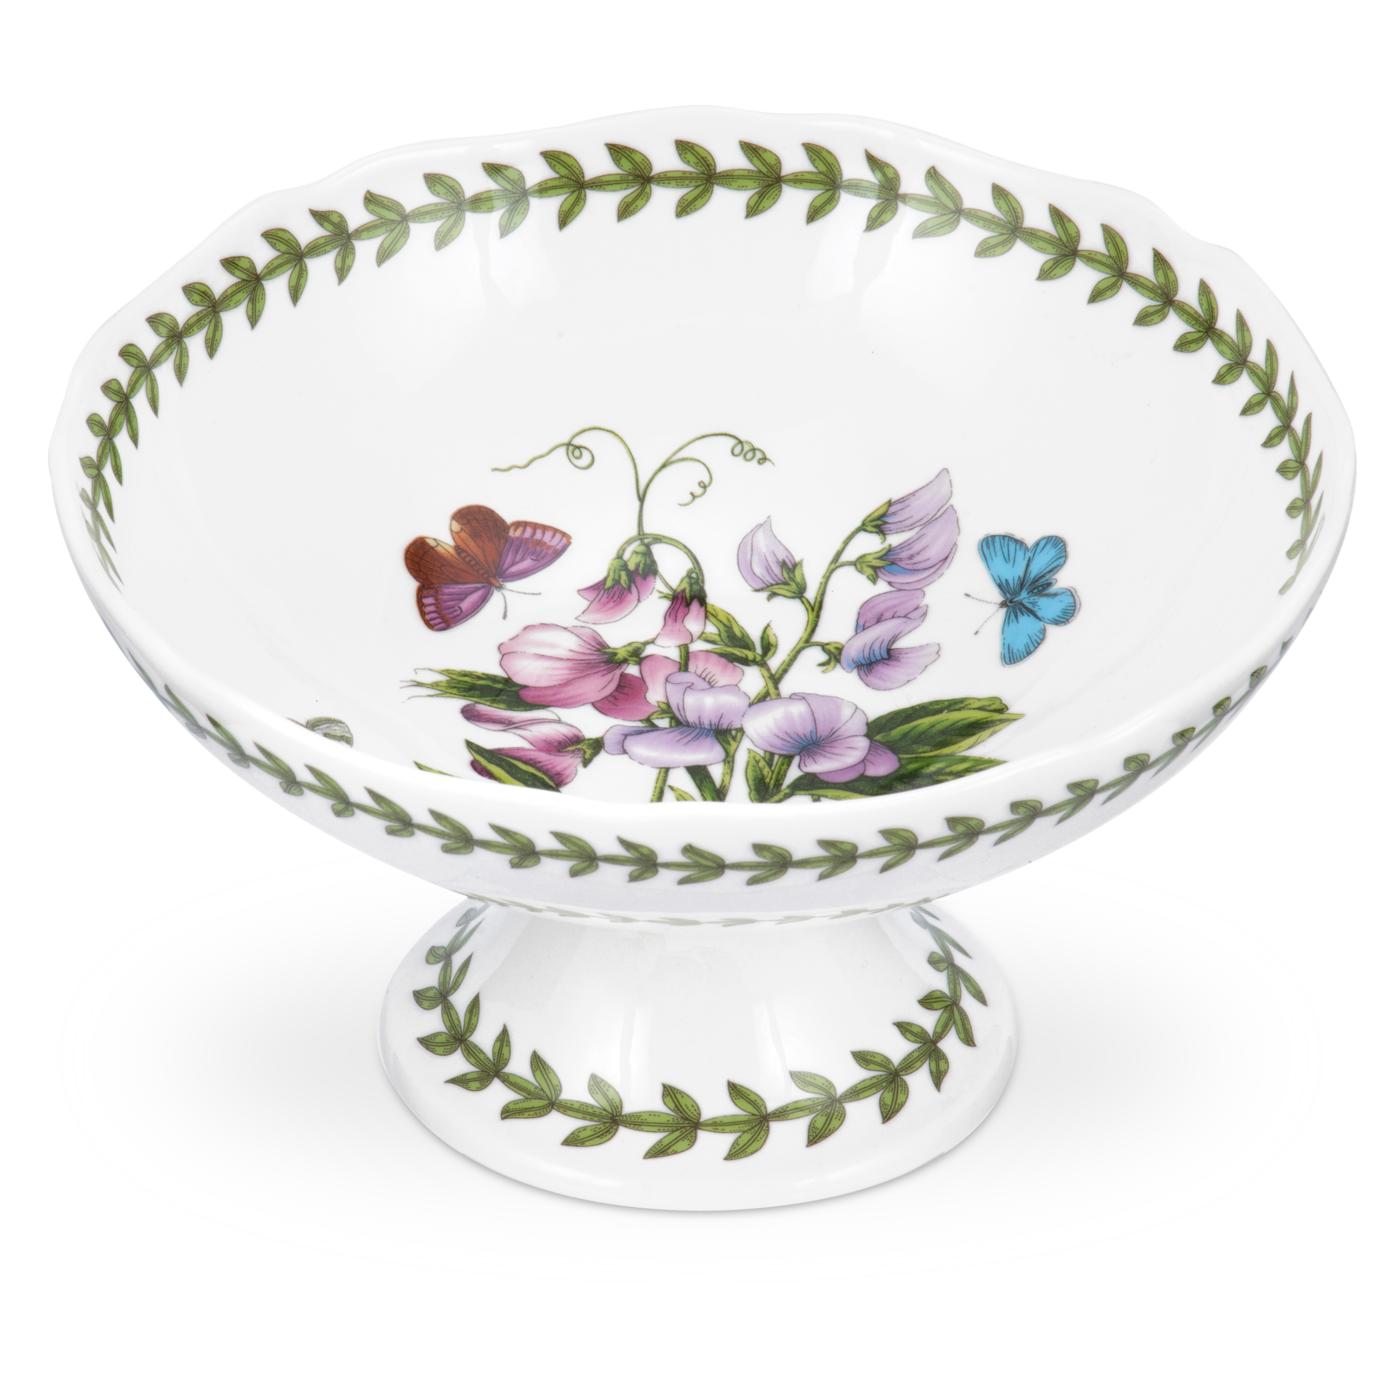 Botanic Garden 7 Inch Scalloped Edge Footed Bowl, Sweet Pea image number null